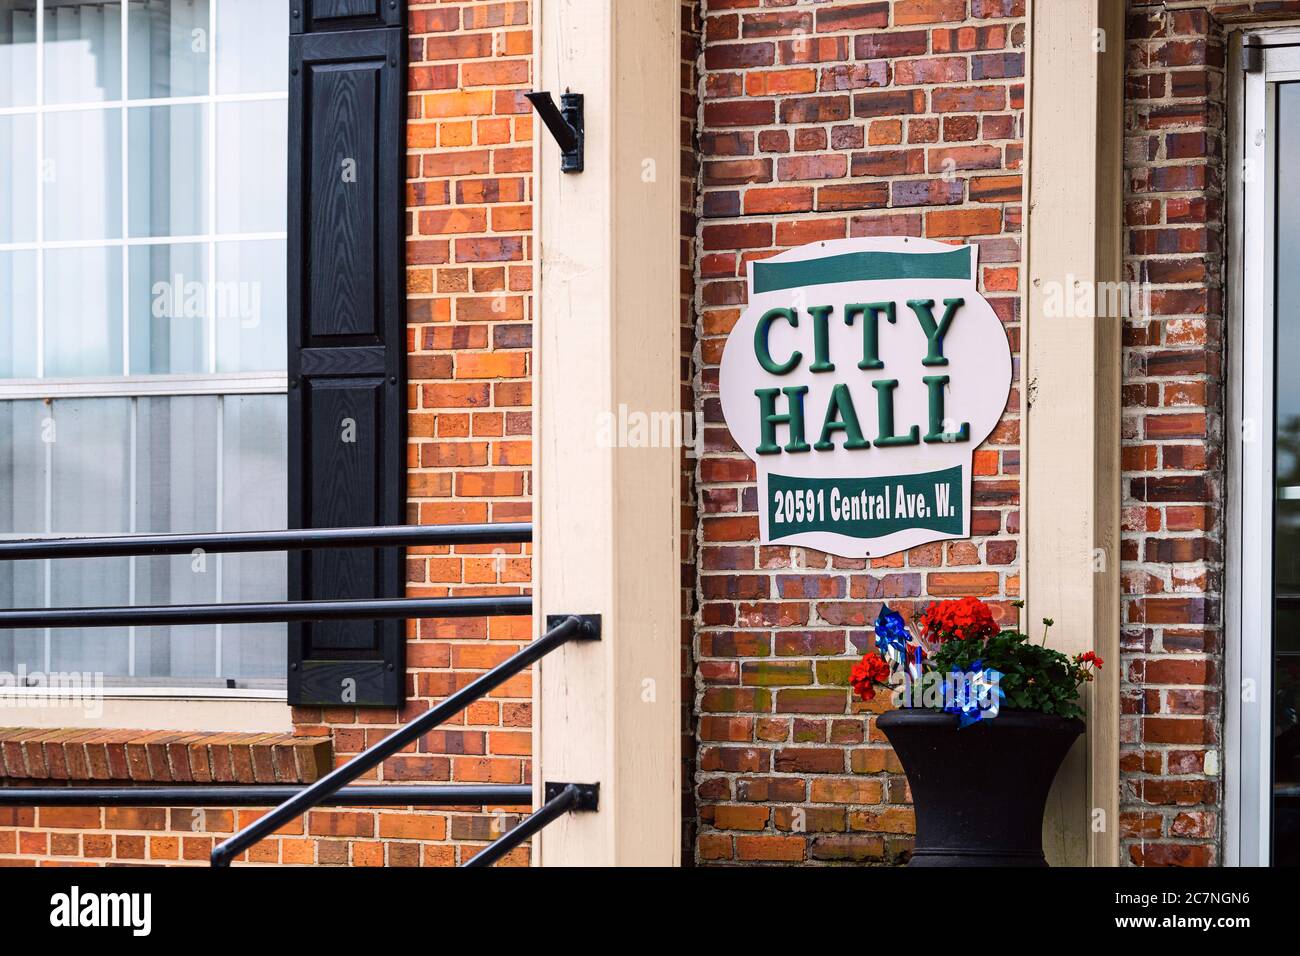 Blountstown, USA - April 26, 2018: Small town city hall sign on central avenue with flowers and historic brick building exterior entrance in Florida Stock Photo